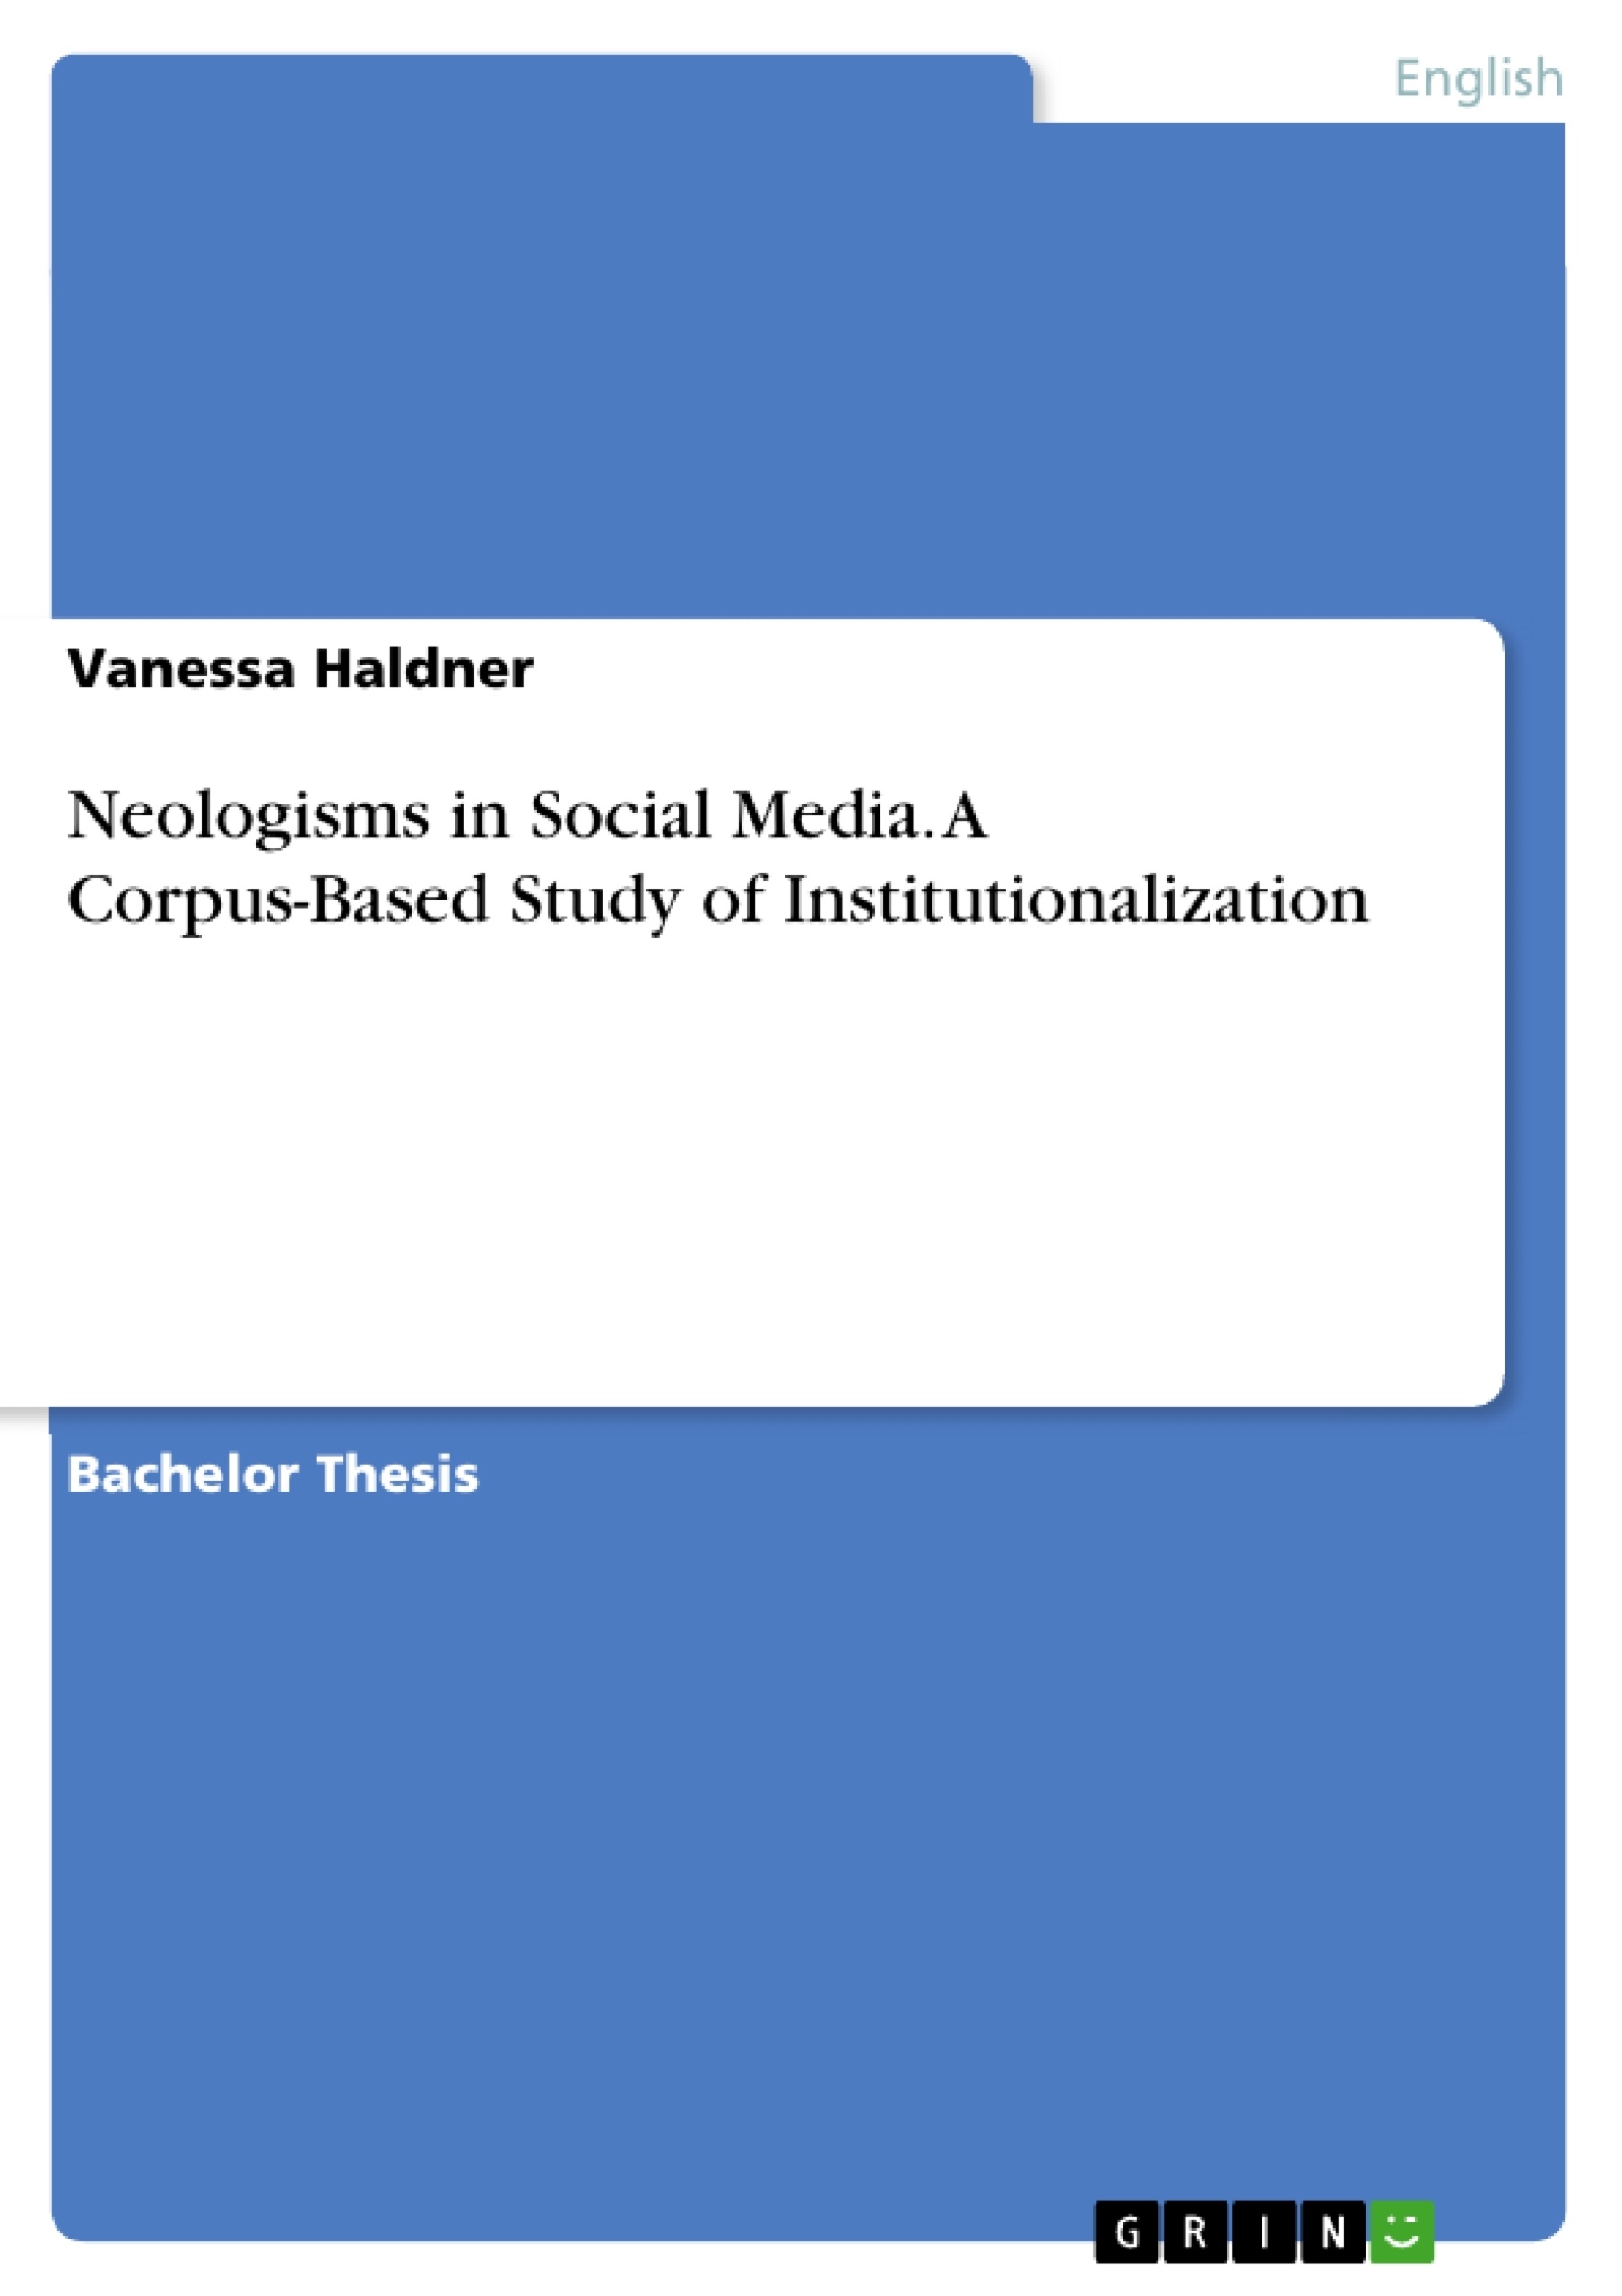 Title: Neologisms in Social Media. A Corpus-Based Study of Institutionalization